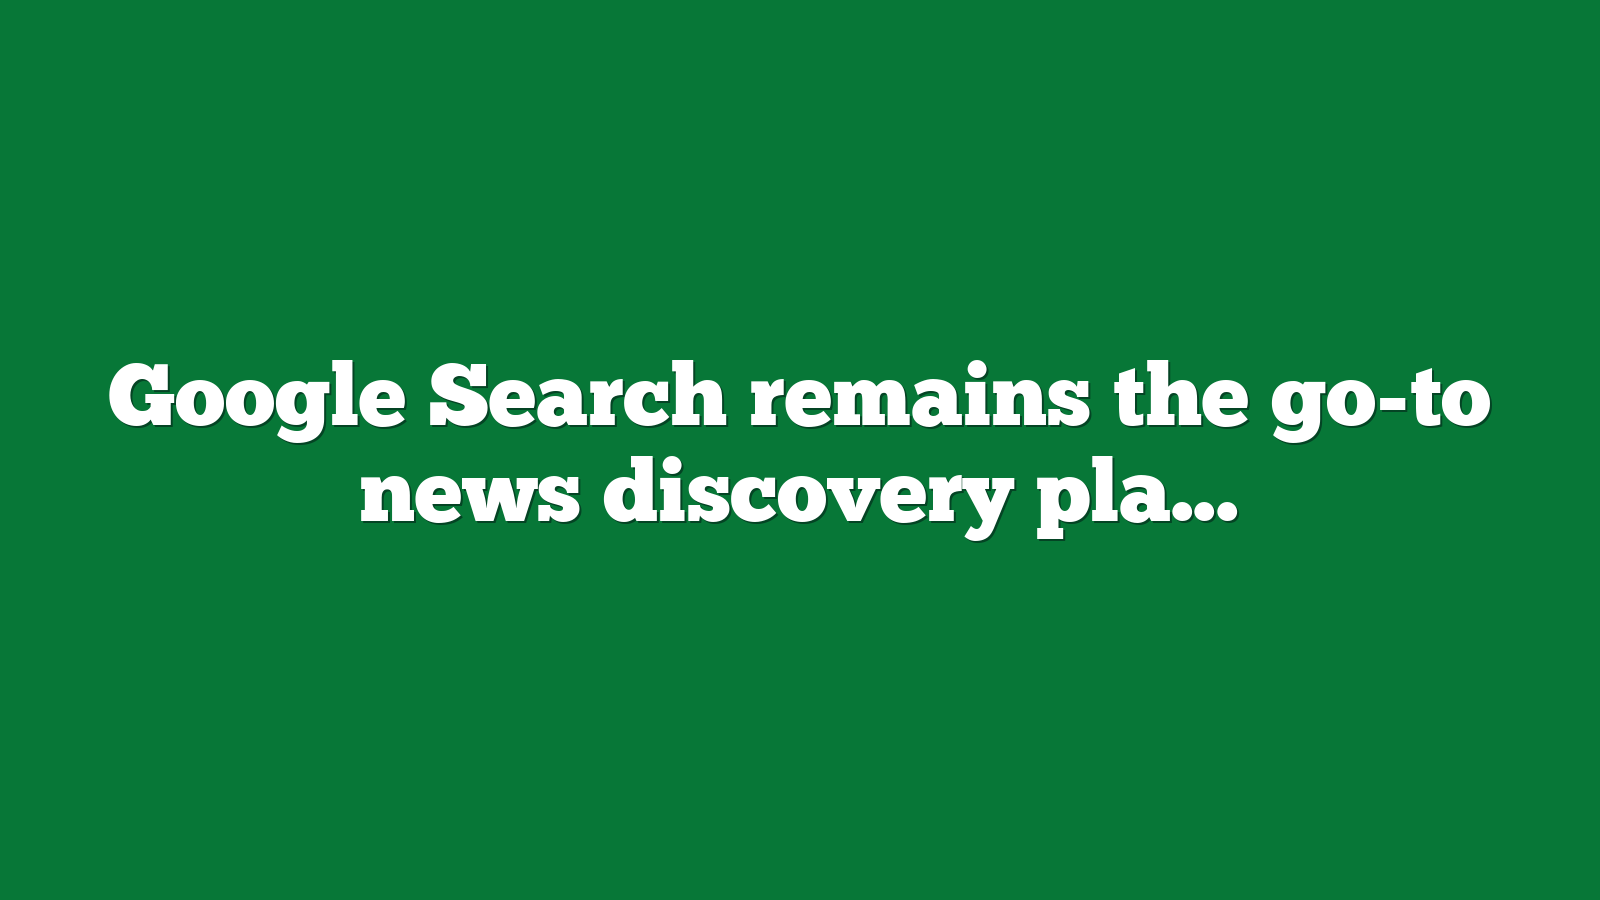 Google Search remains the go-to news discovery platform